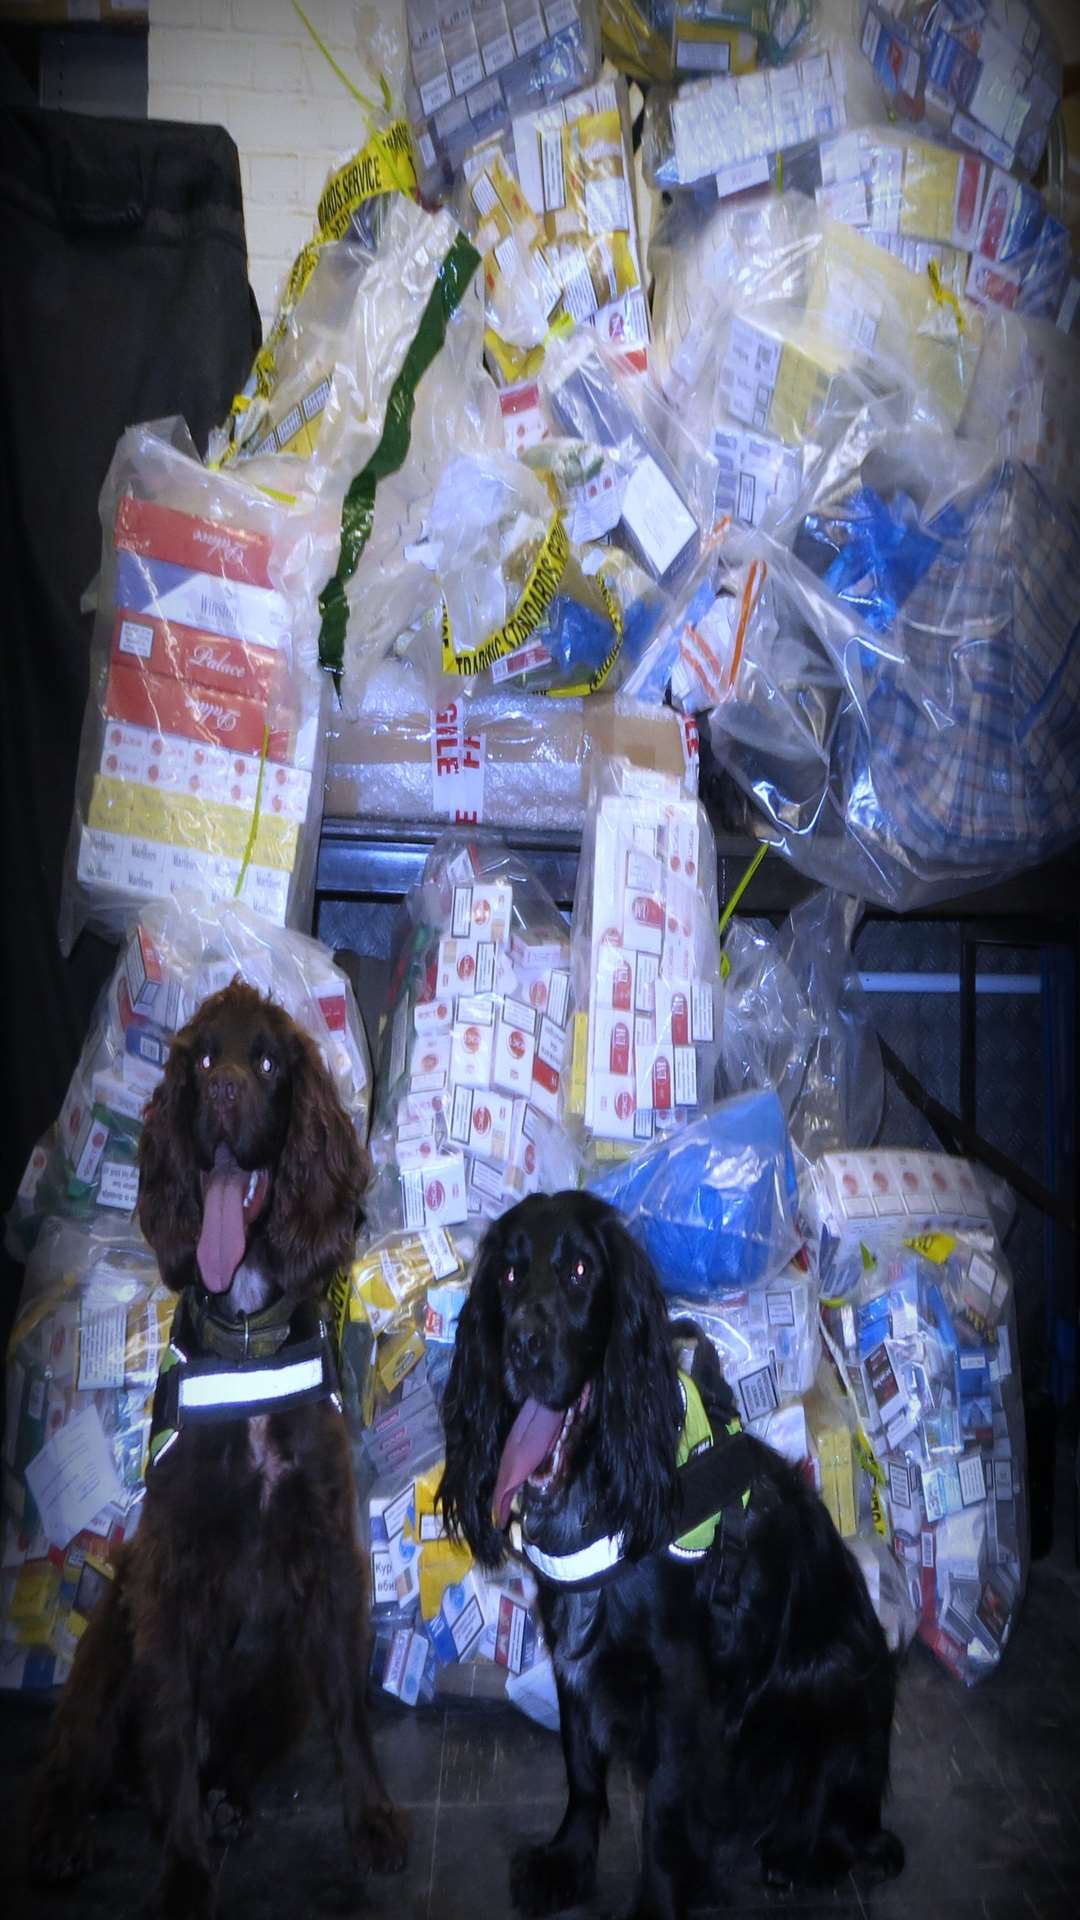 The sniffer dogs with the seized tobacco from the two shops